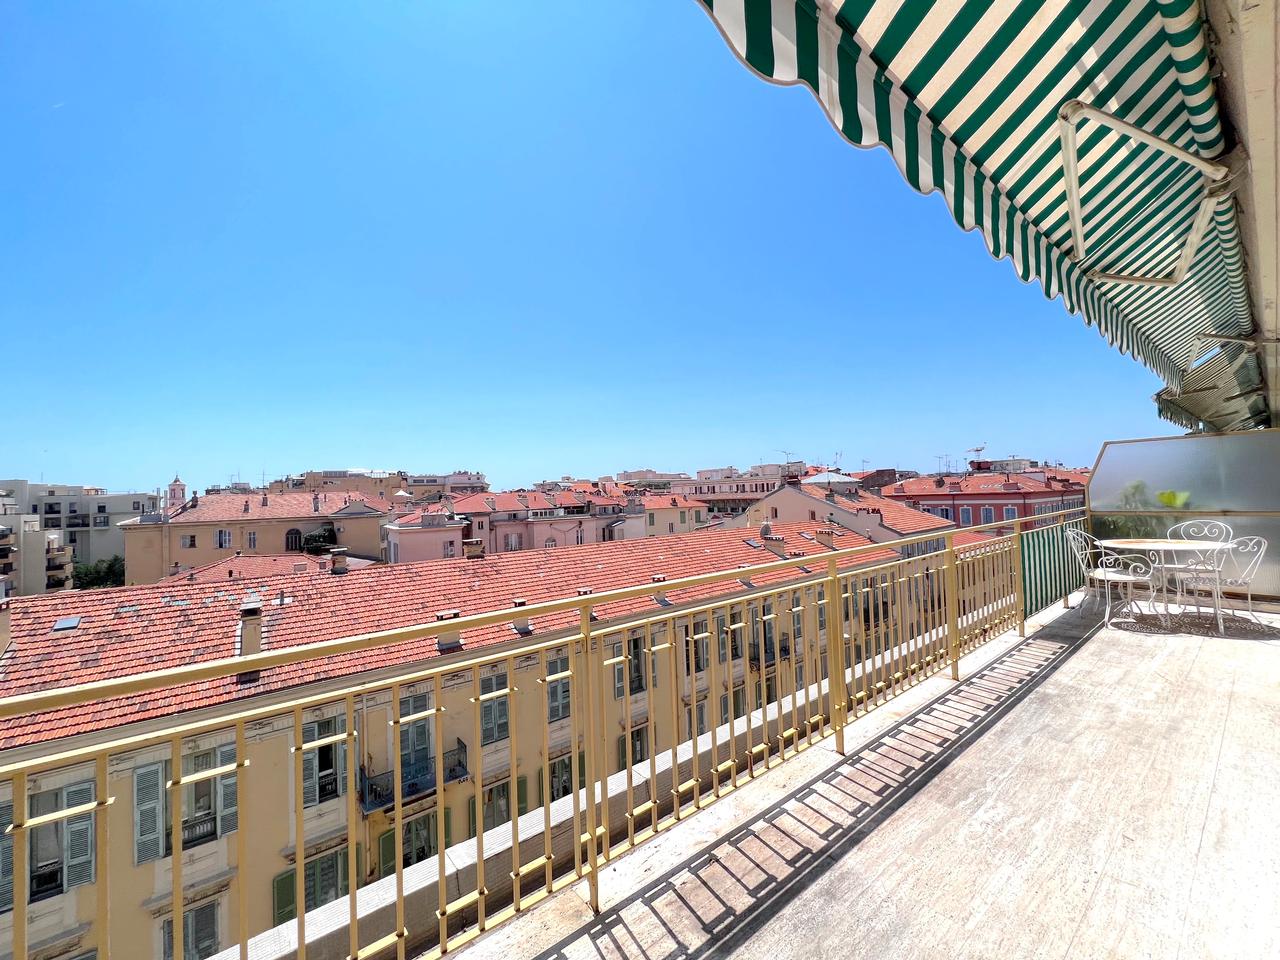 Nice Riviera - Real estate agency Nice Côte d'Azur | Appartement  2 Rooms 56.68m2  for sale   650 000 €